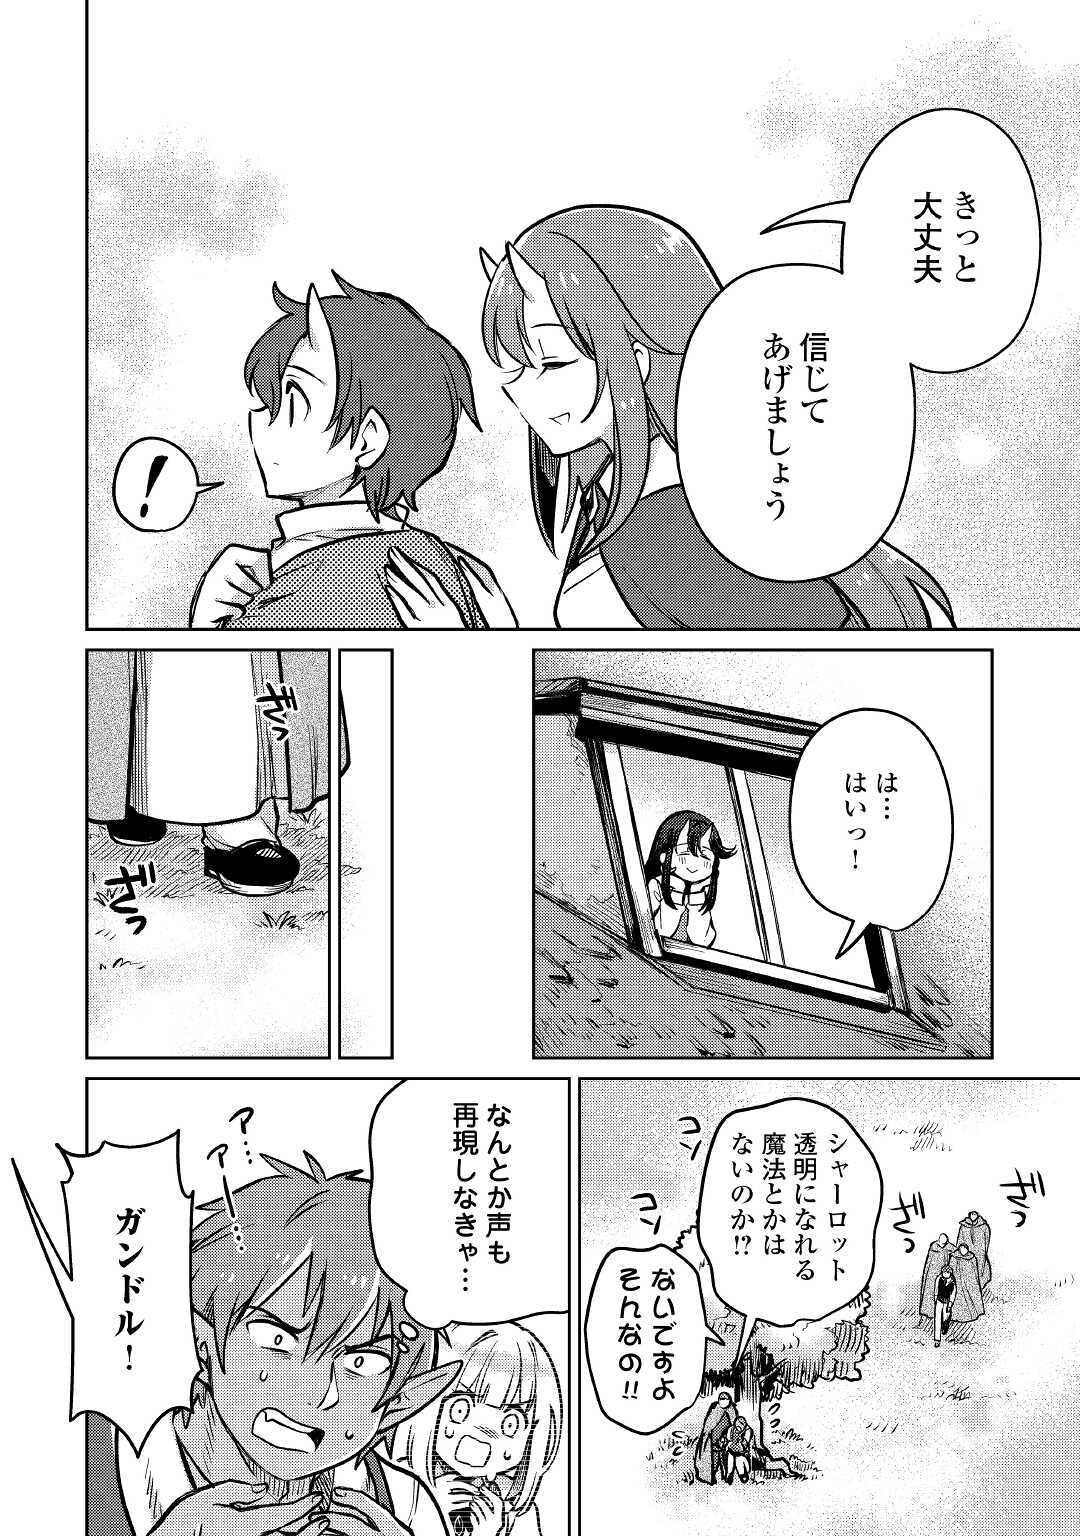 The Former Structural Researcher’s Story of Otherworldly Adventure 第34話 - Page 8